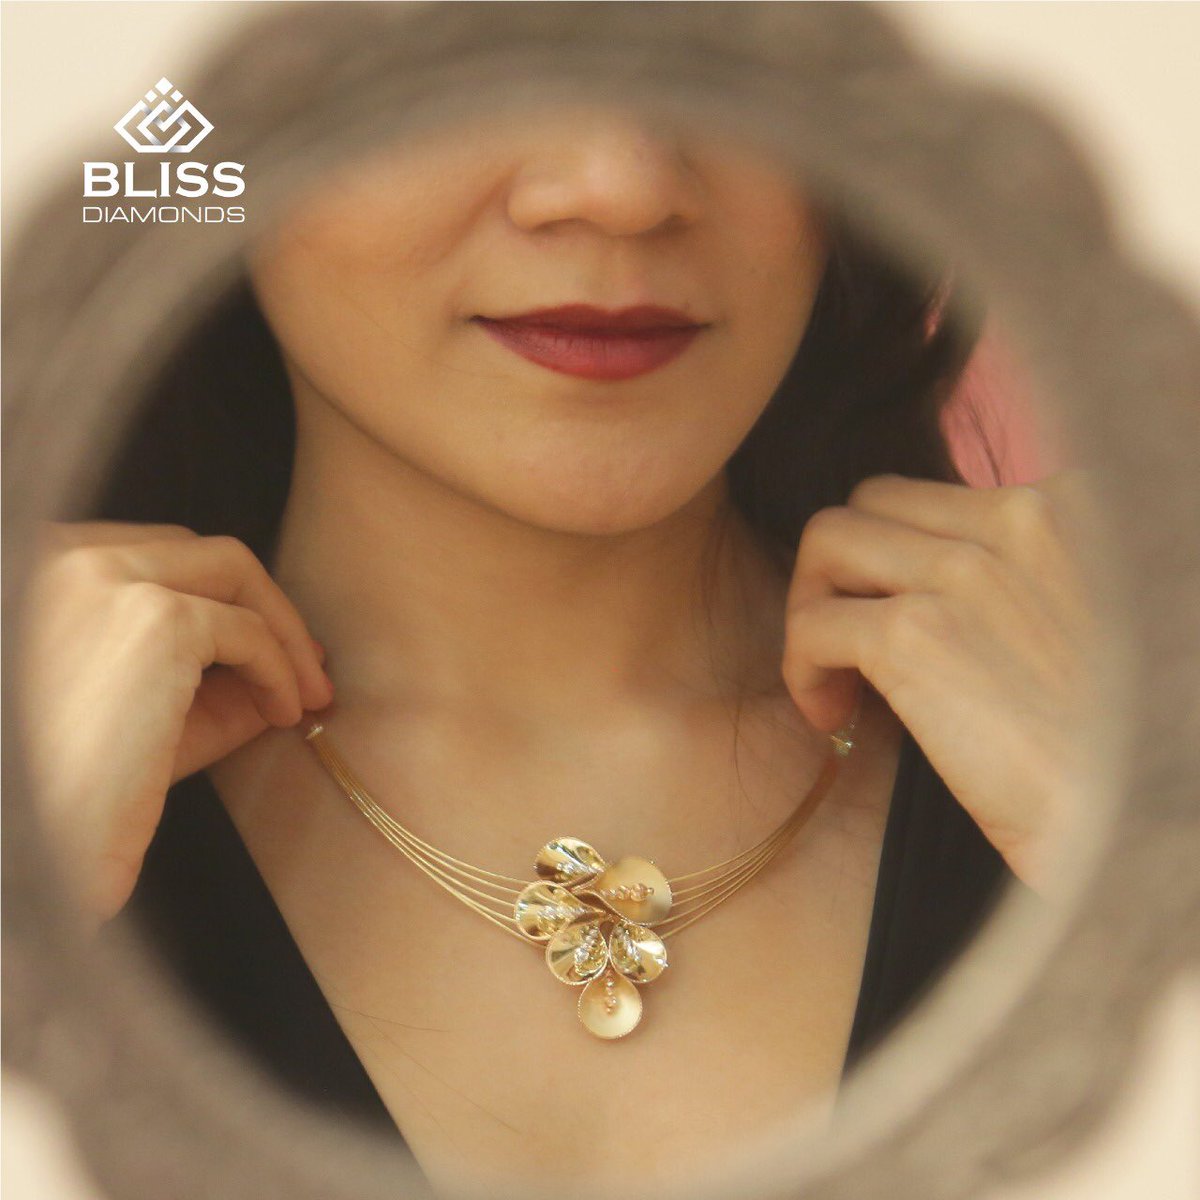 You’ll experience pure bliss when you wear this around your neck! This beautiful & uniquely designed gold-leaf necklace is a perfect wear for any occasion. 

DM us to shop now!
.
.
.
#BlissDiamonds #WearBliss #ItalianJewellery #CustomisedJewellery #Necklace #Customised #Trendy